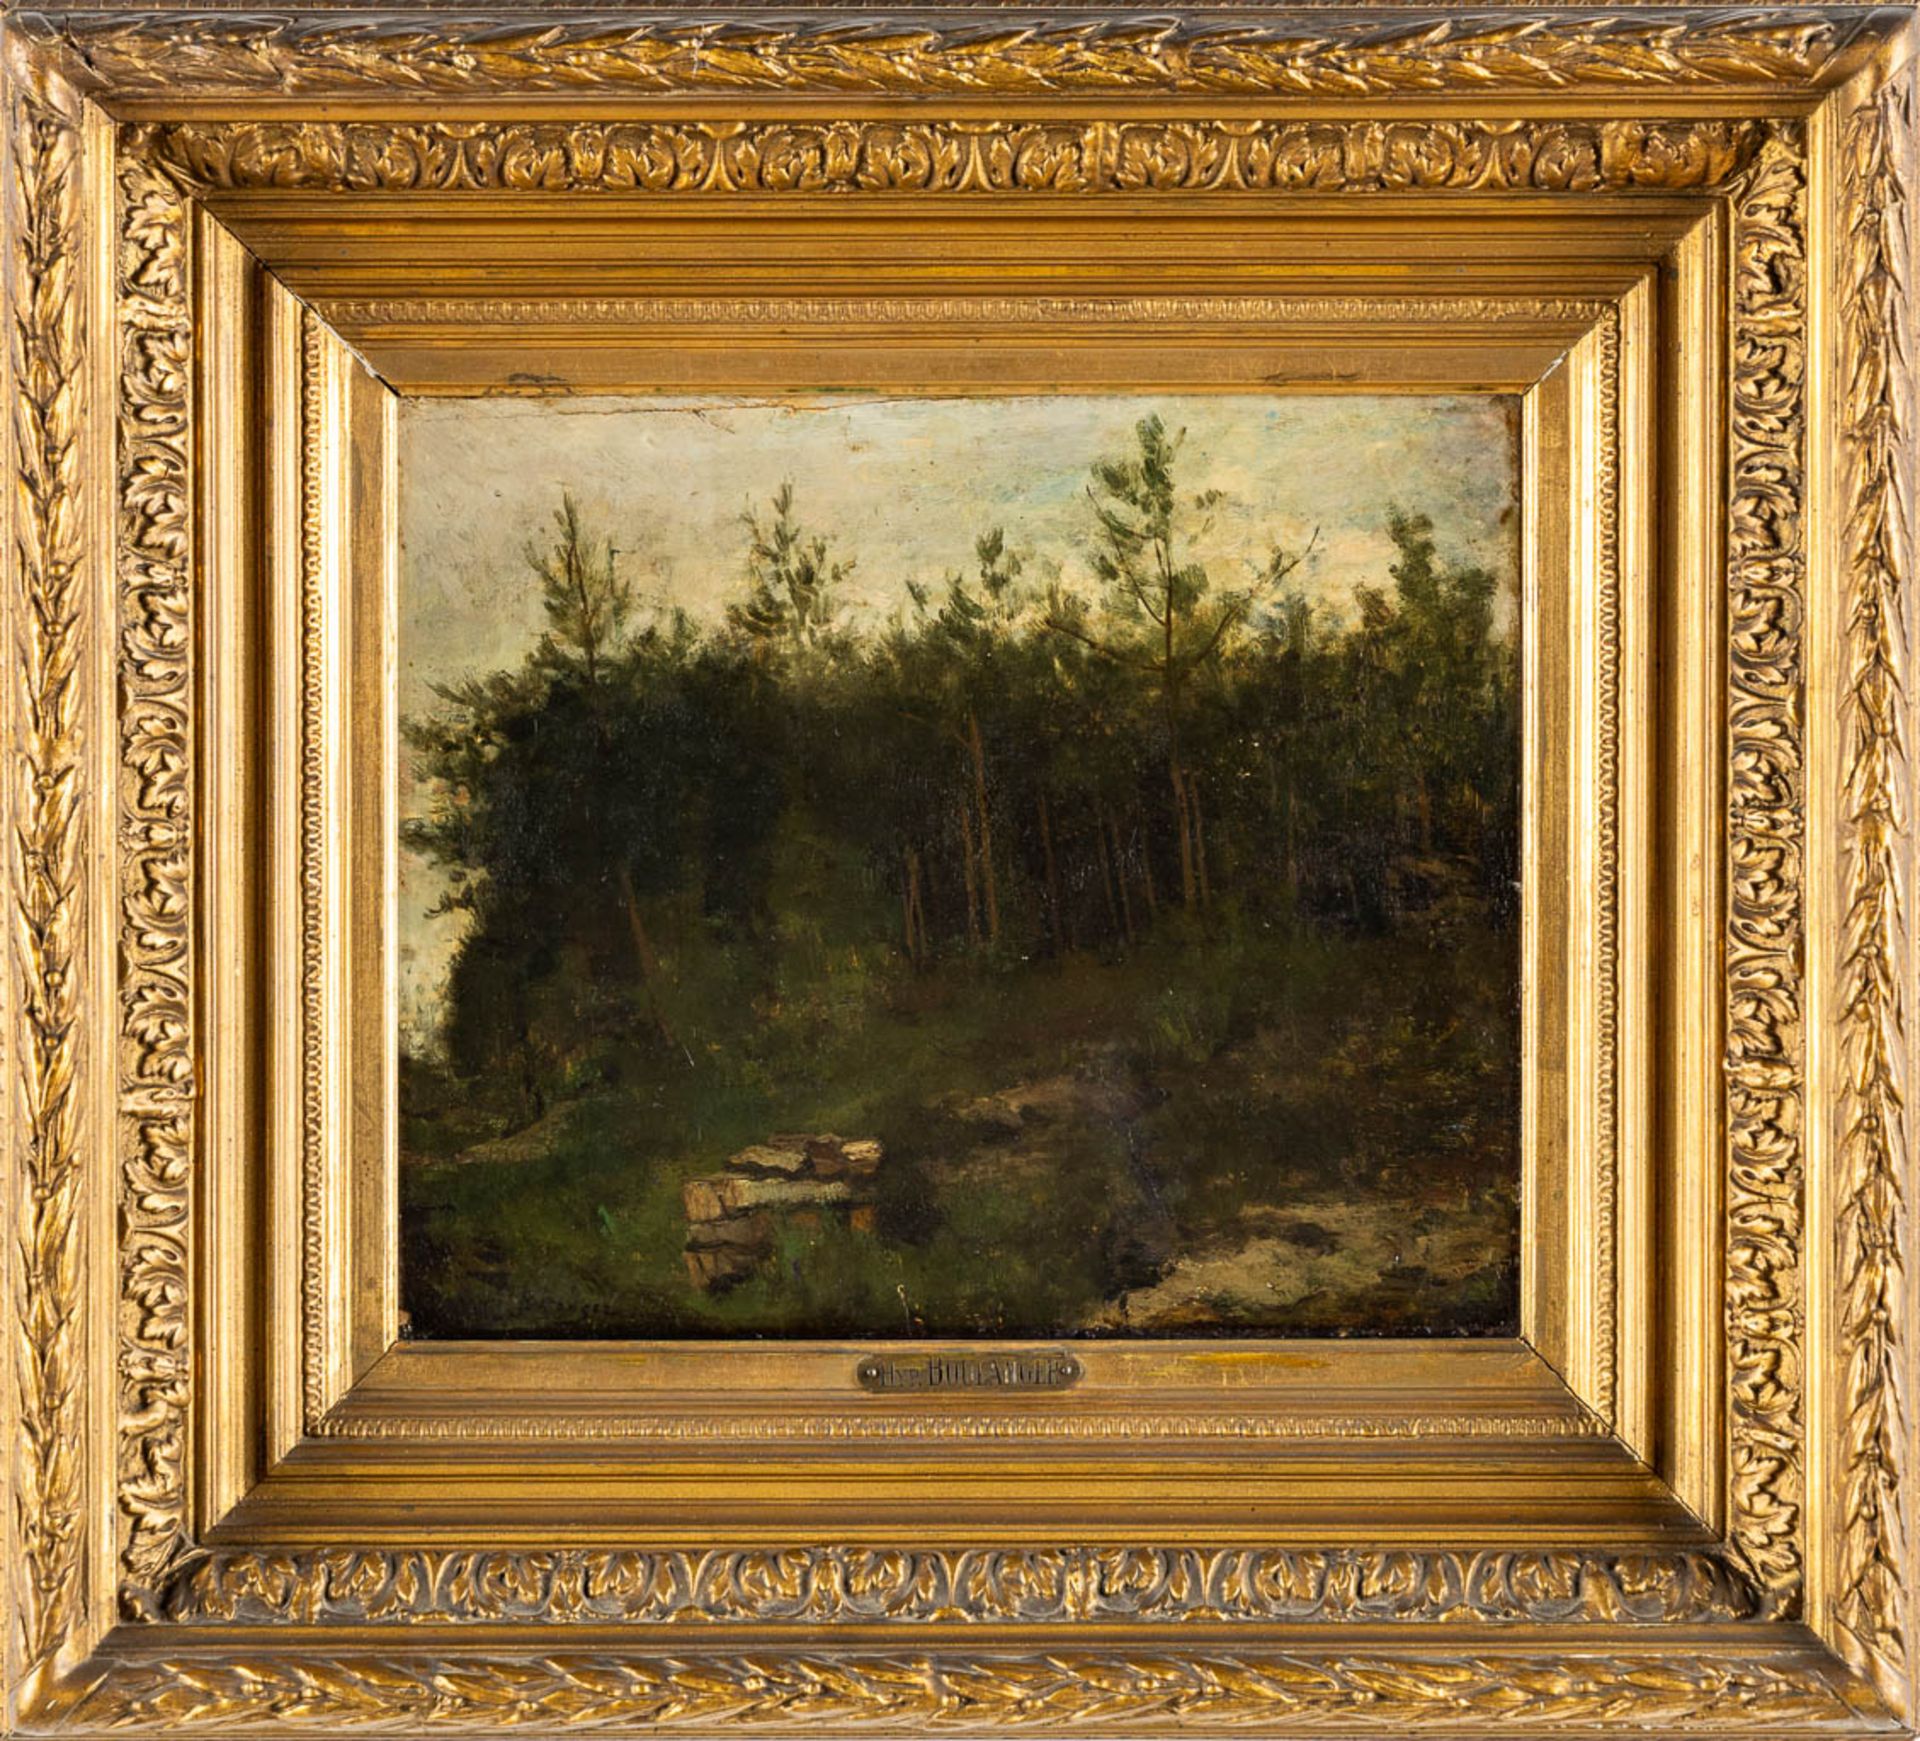 Hippolyte BOULENGER (1837-1874) 'Forest View' oil on canvas. (W:35 x H:30 cm) - Image 3 of 7